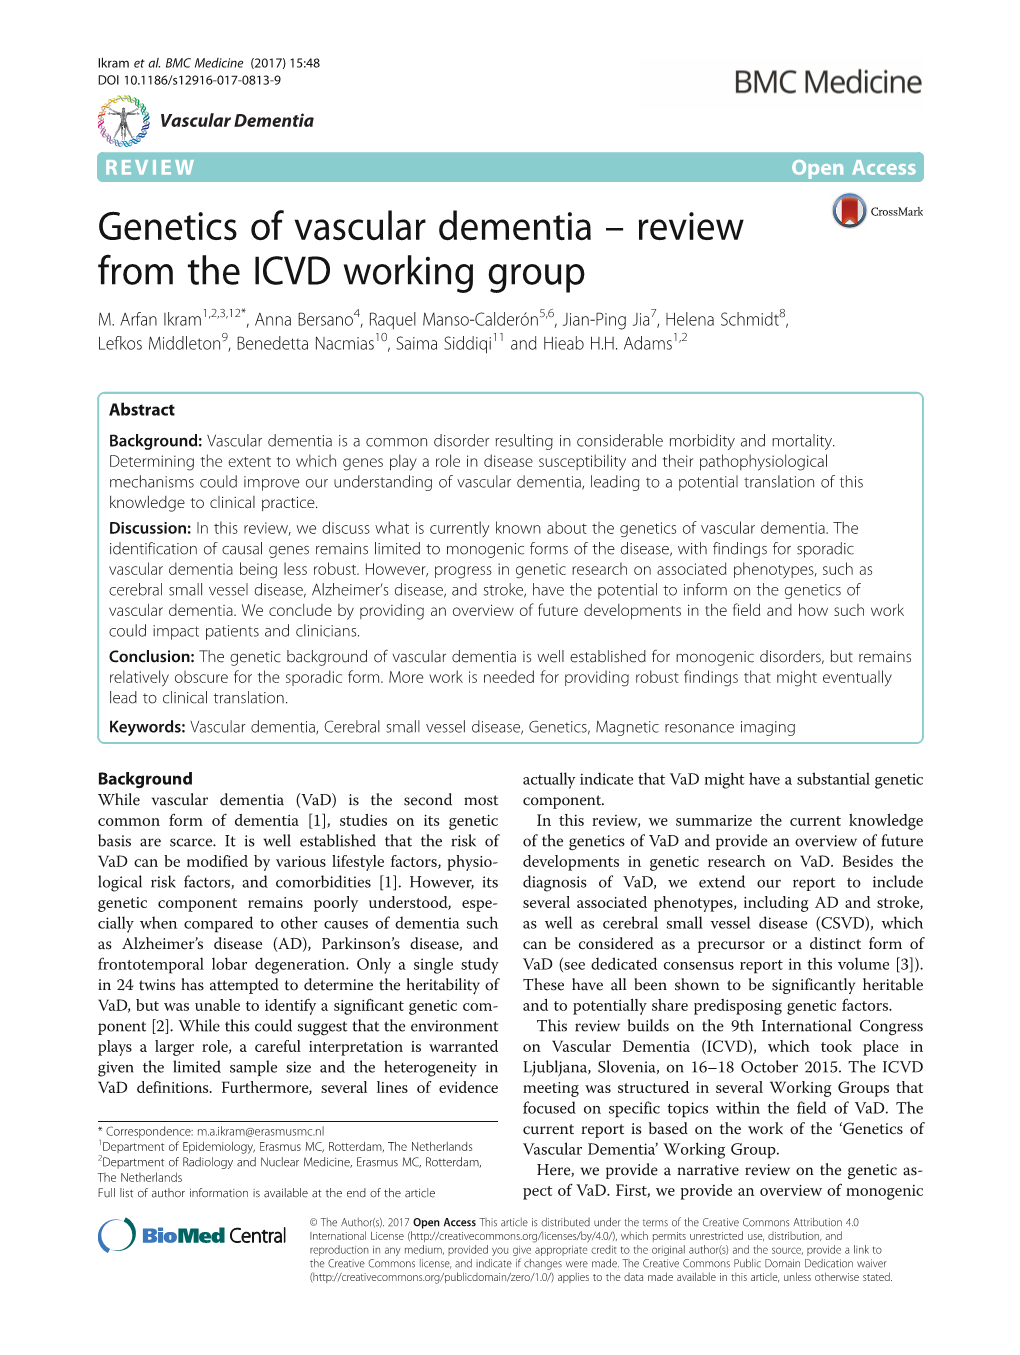 Genetics of Vascular Dementia – Review from the ICVD Working Group M